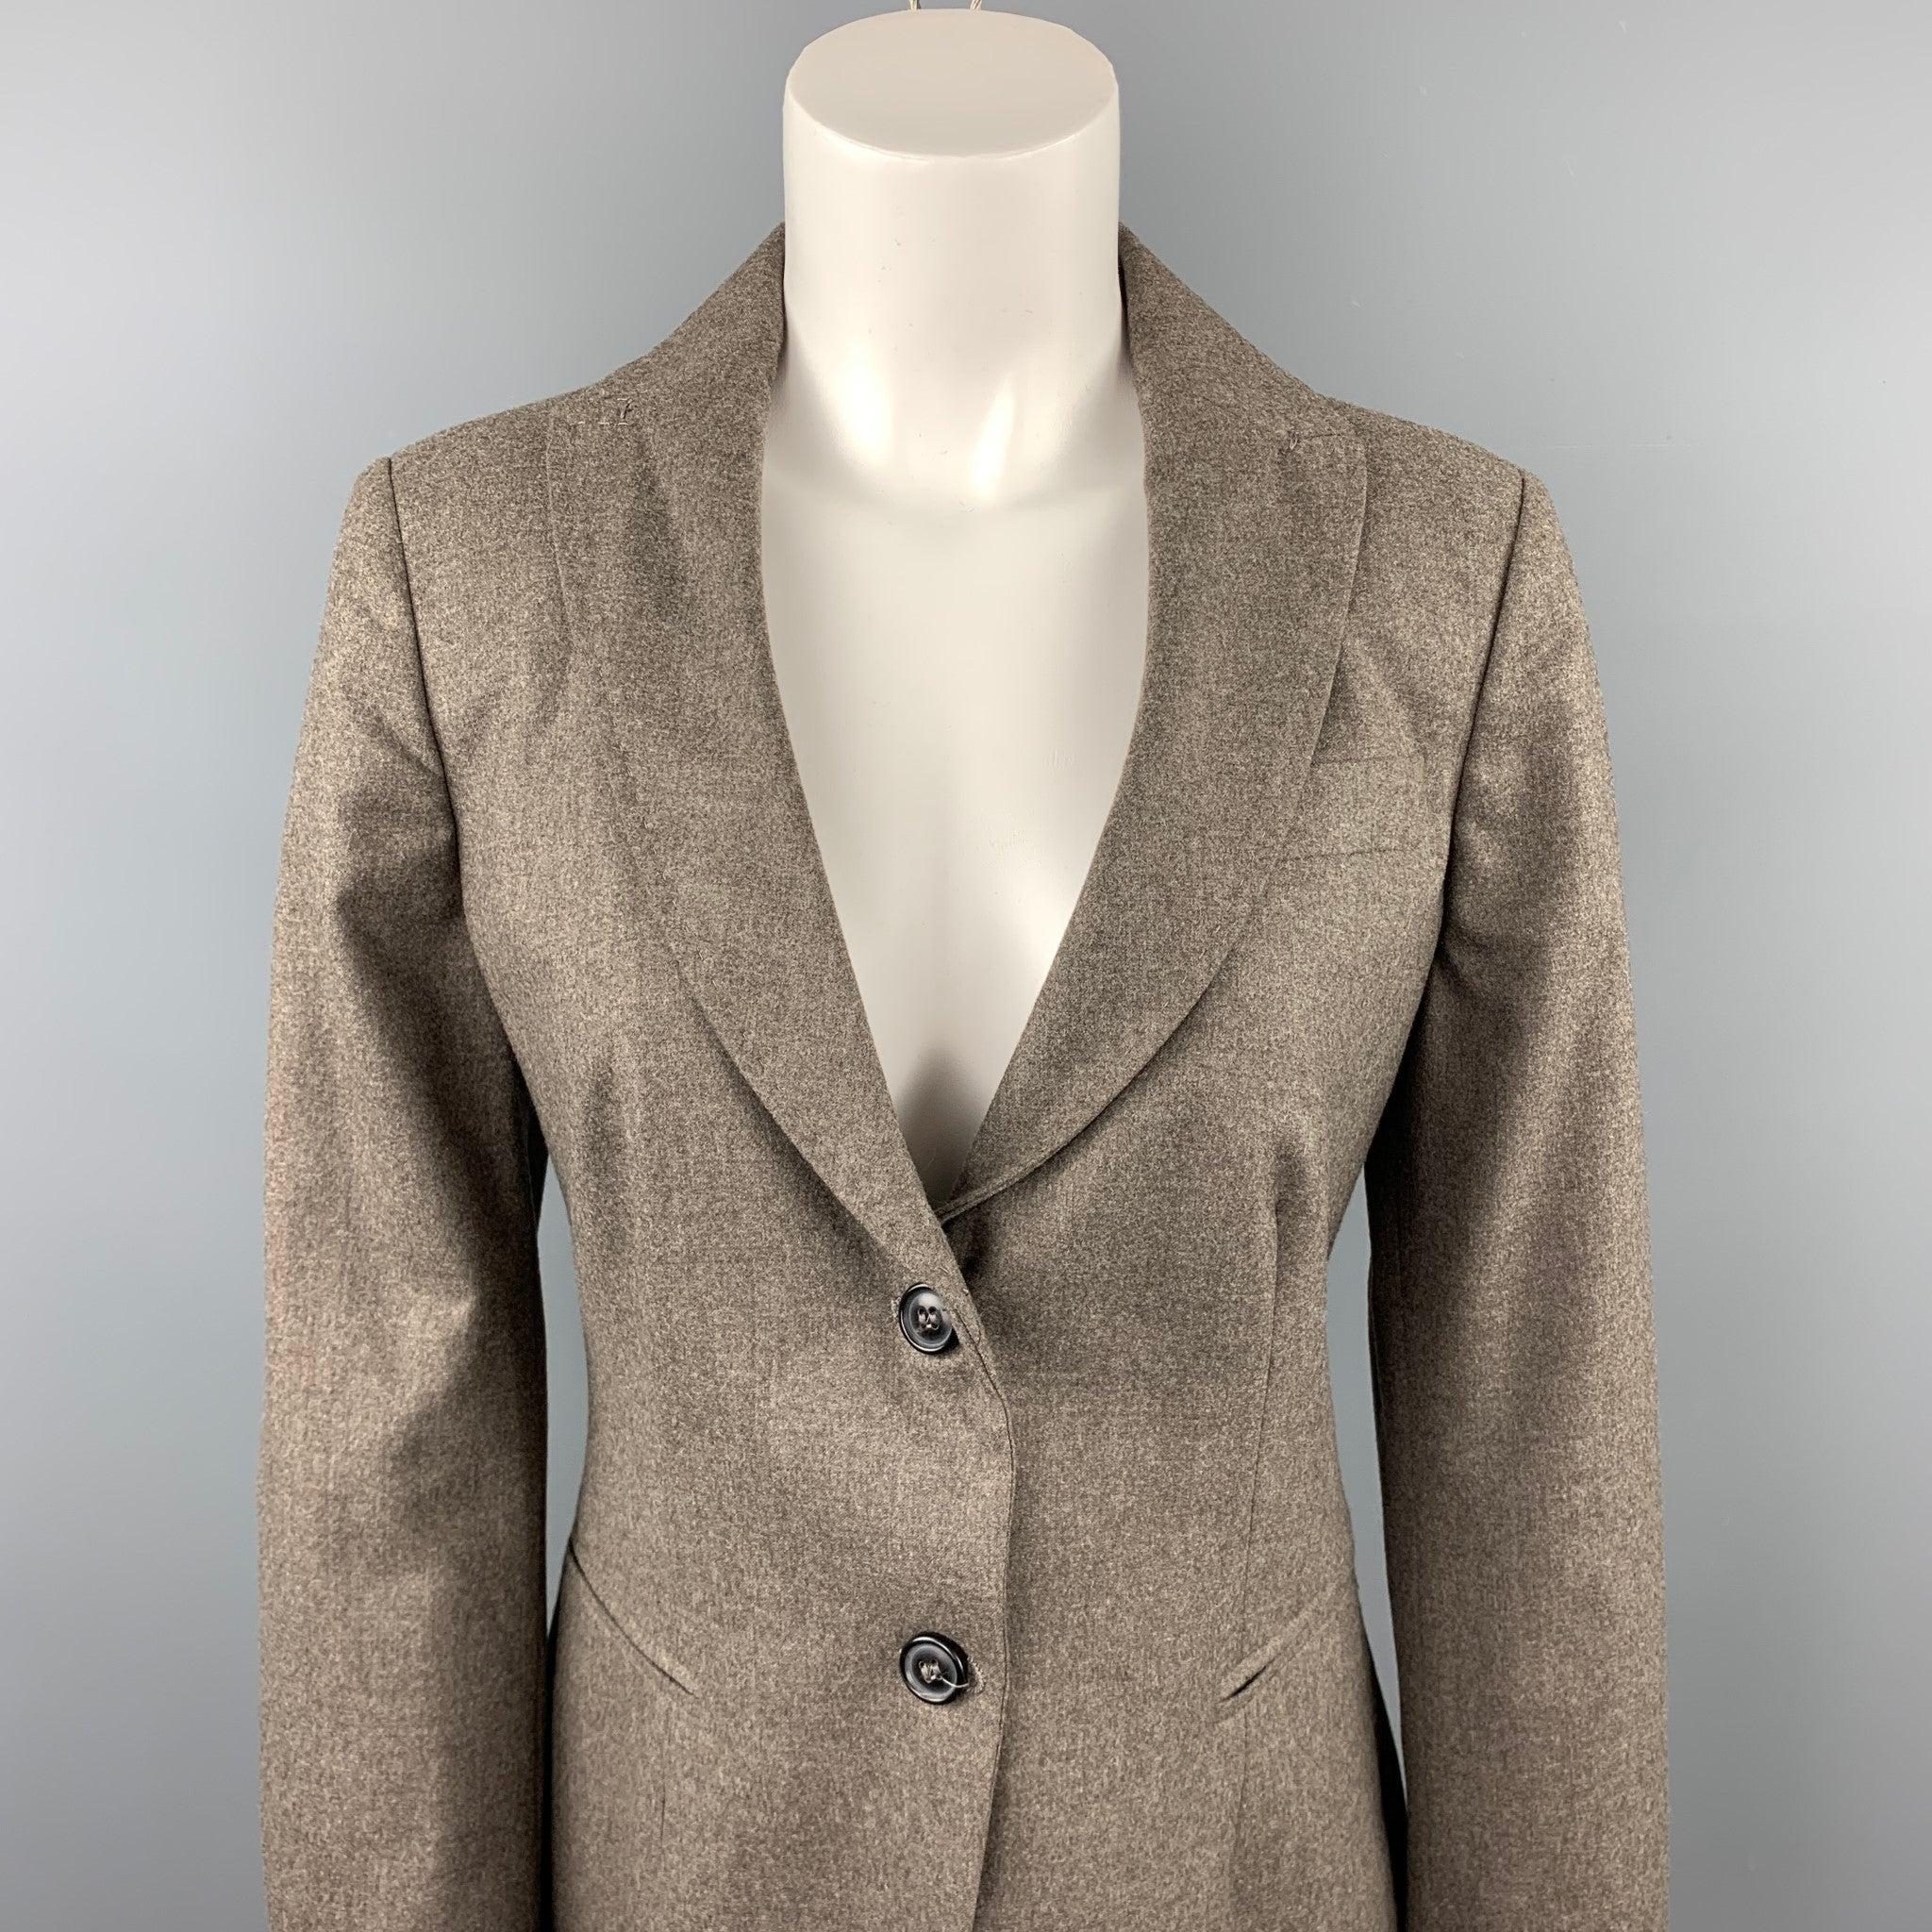 PIAZZA SEMPIONE blazer comes in a taupe wool blend featuring a notch lapel style, slit pockets, and a buttoned closure. Made in Italy.Very Good
Pre-Owned Condition. 

Marked:   IT 44 

Measurements: 
 
Shoulder: 16 inches 
Bust: 34 inches 
Sleeve: